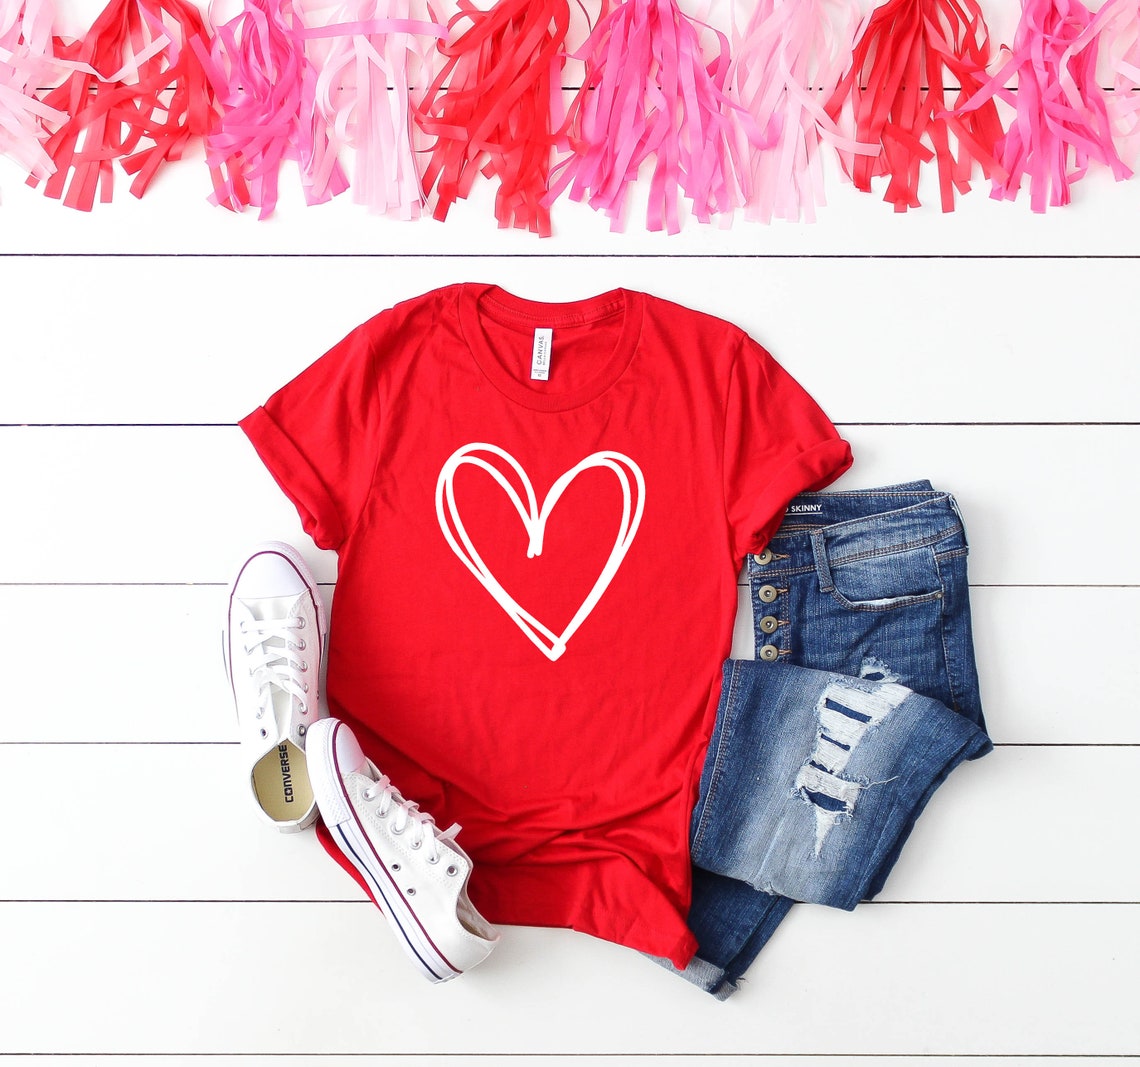 Valentines Day Shirt For Women - Cute and Modern Heart Design